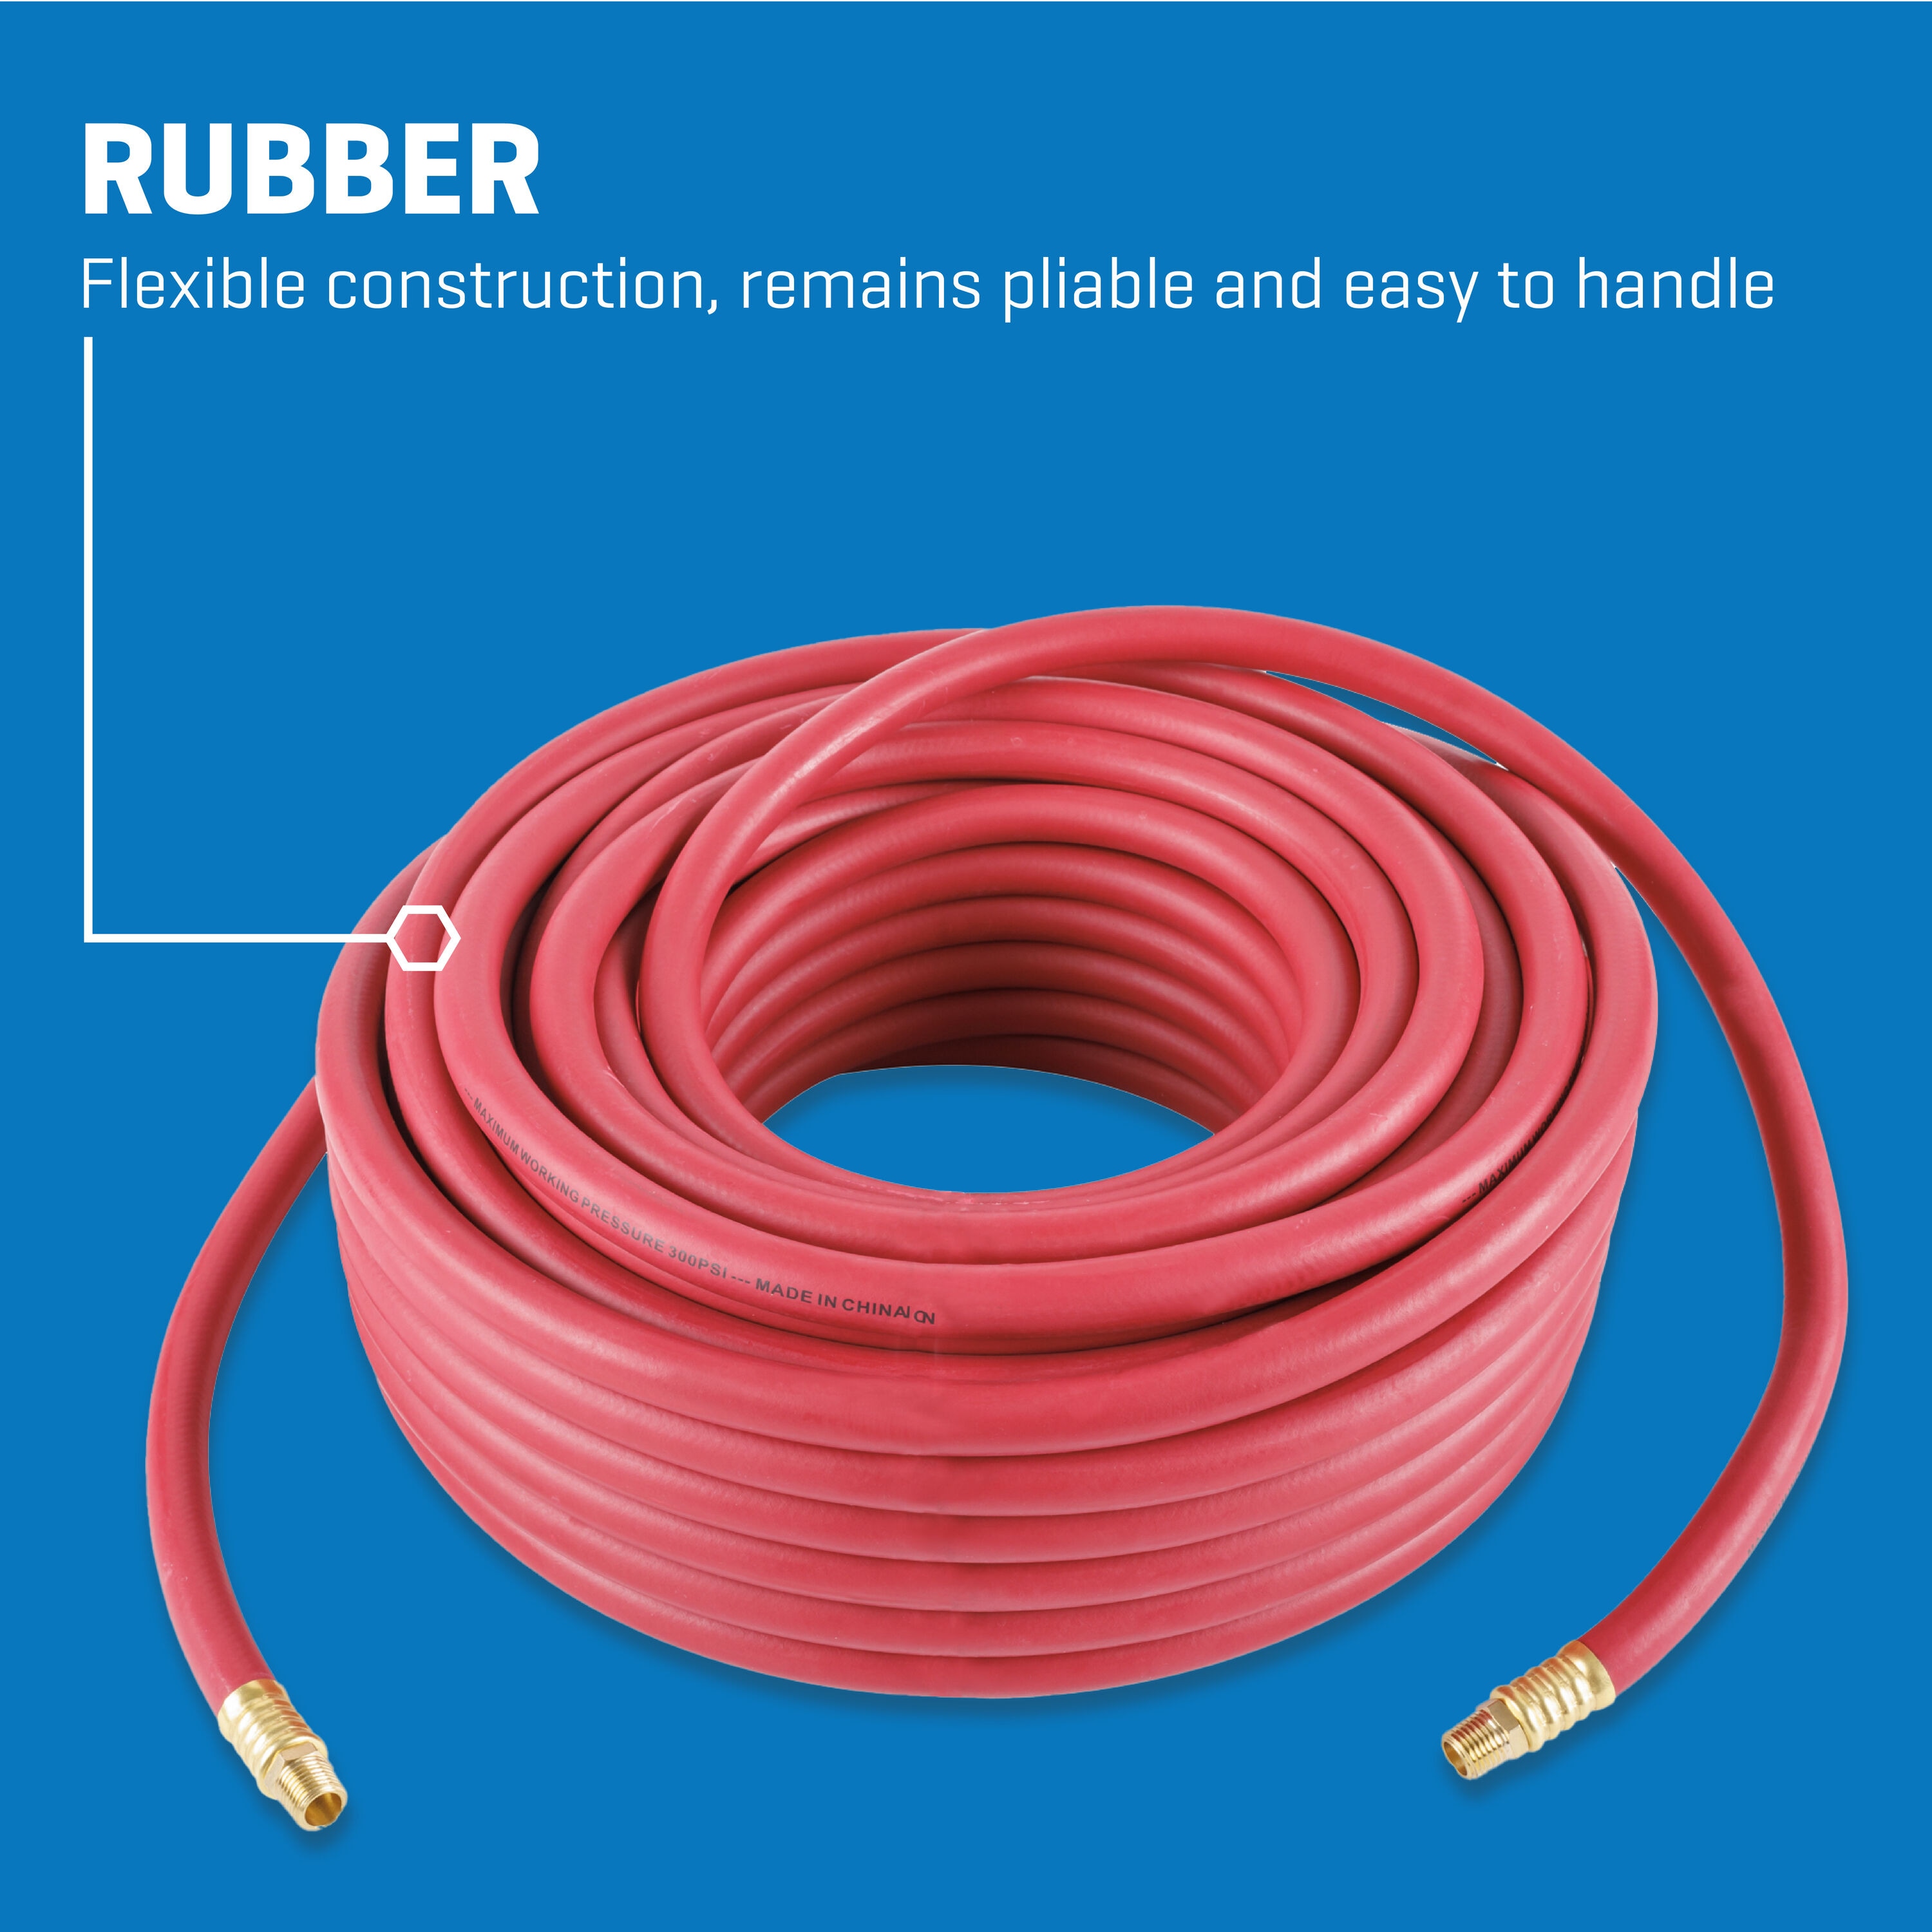 3/4 inch x 100 ft Red Rubber Air Hose with 3/4 Male Pipe Ends (npt thread)